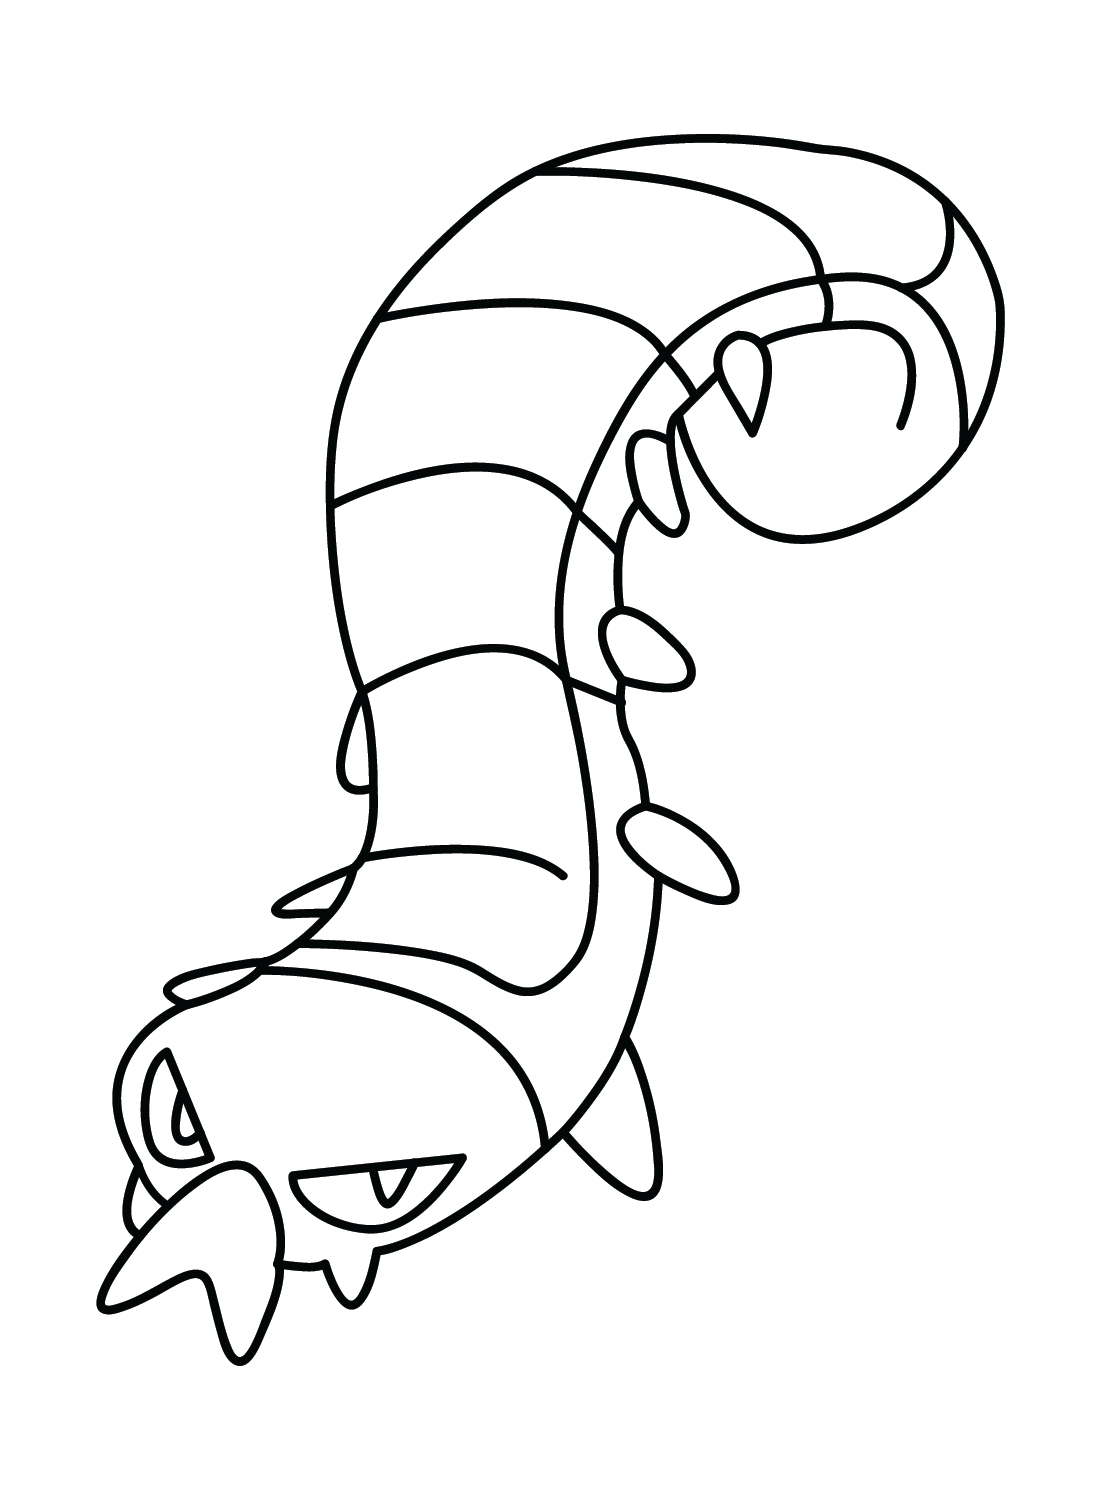 Sizzlipede Pictures Coloring Page